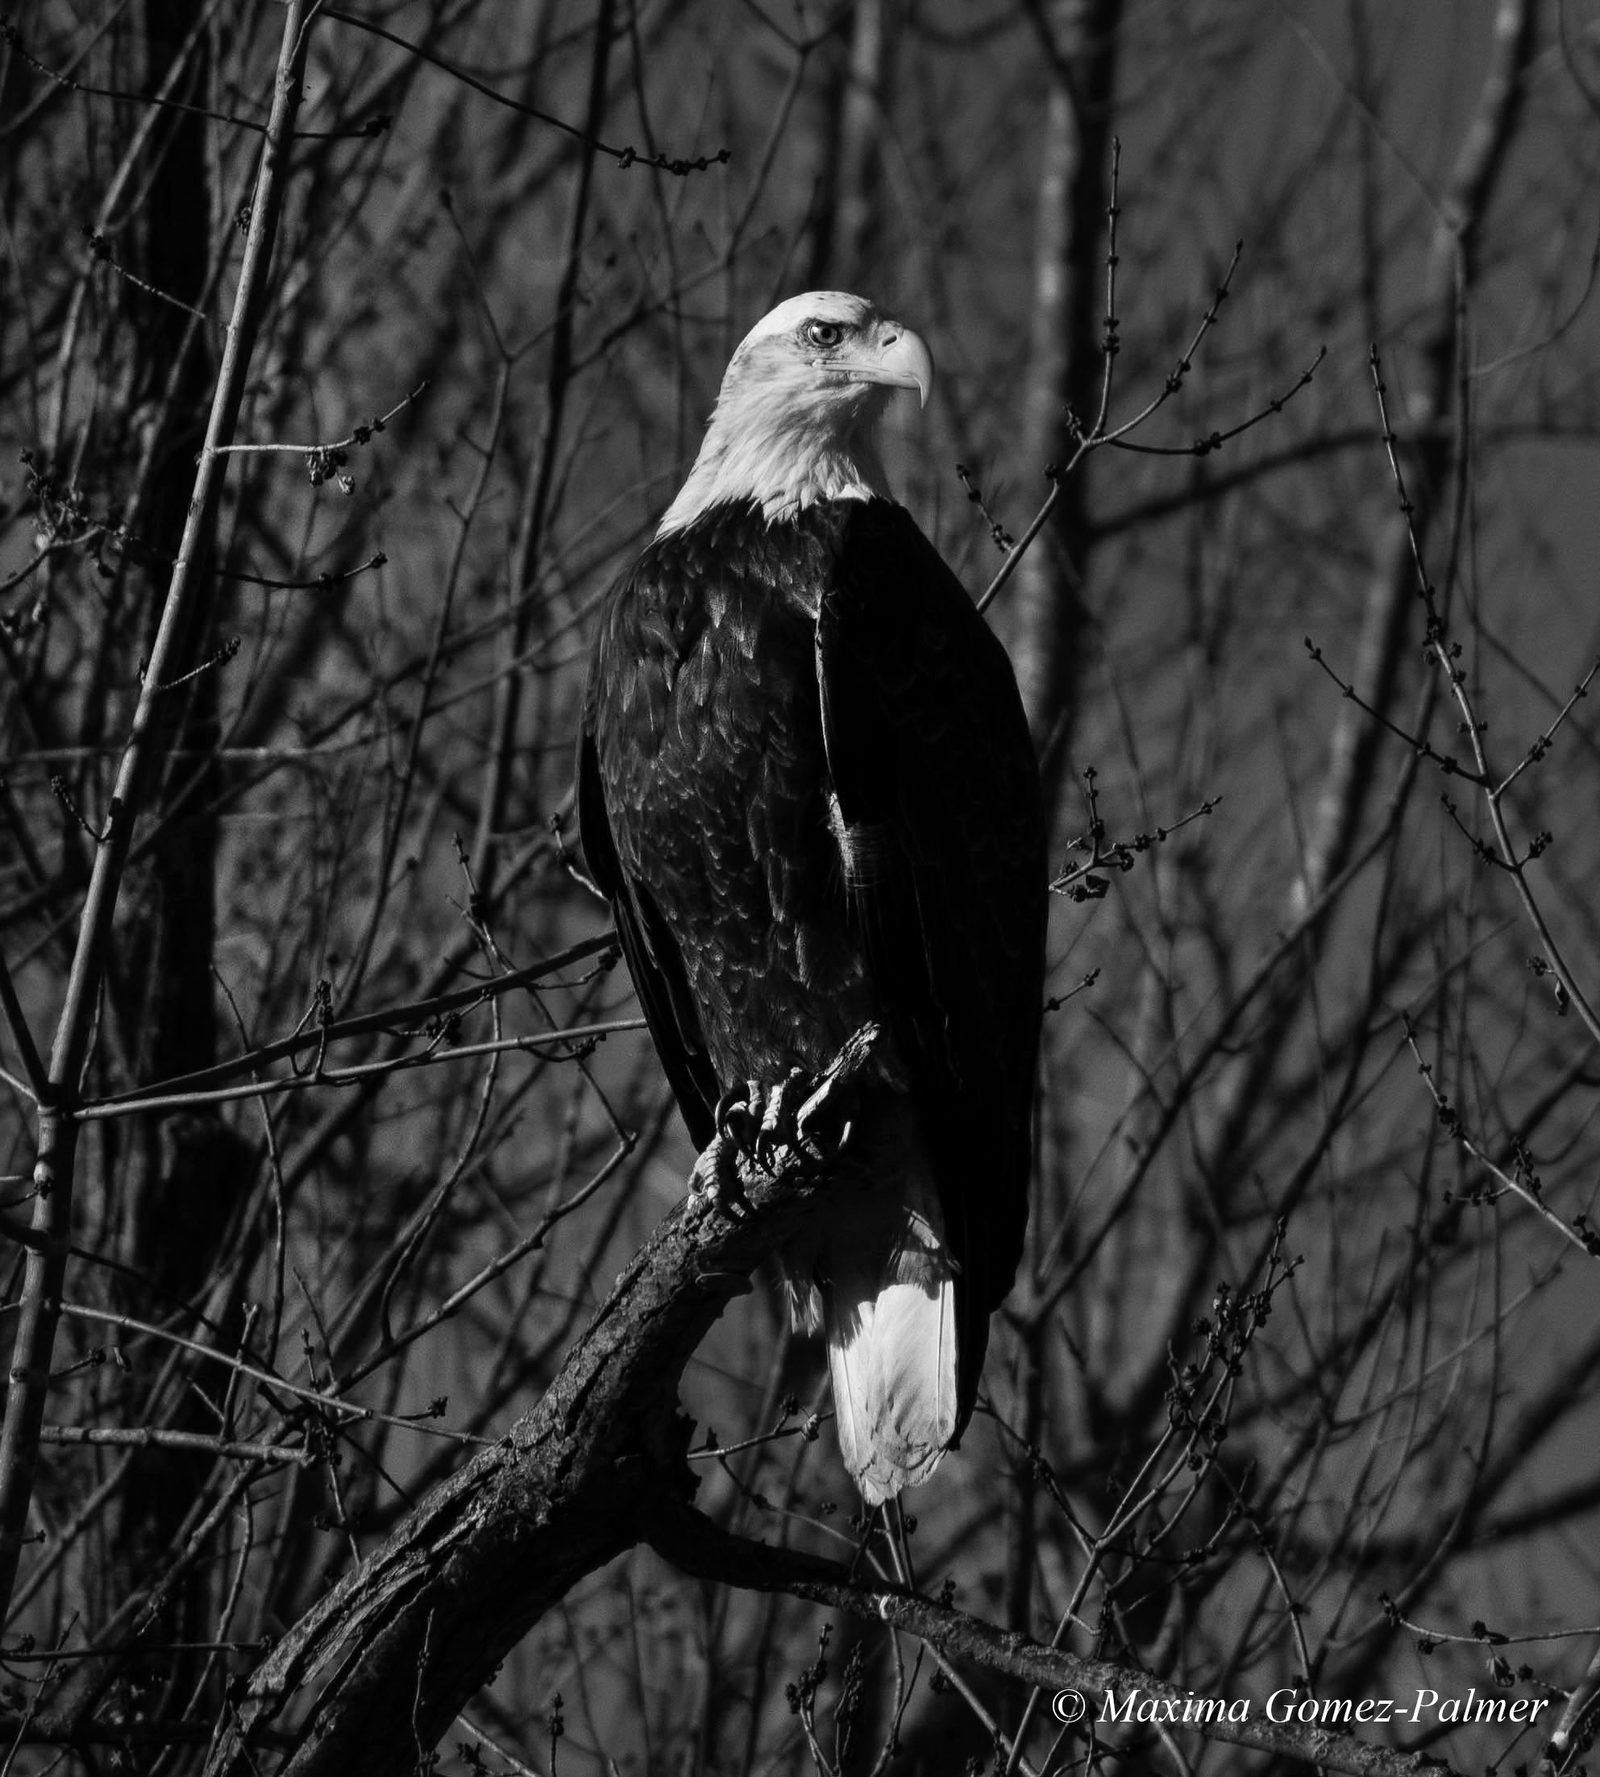 Taking advantage of the balmy 50° weather, I ventured into the lower arb for a leisurely stroll, not expecting to see much besides muddy trails and barren trees. All of a sudden, I glance across the Cannon River and see this majestic beauty, perching completely still. I almost missed it!